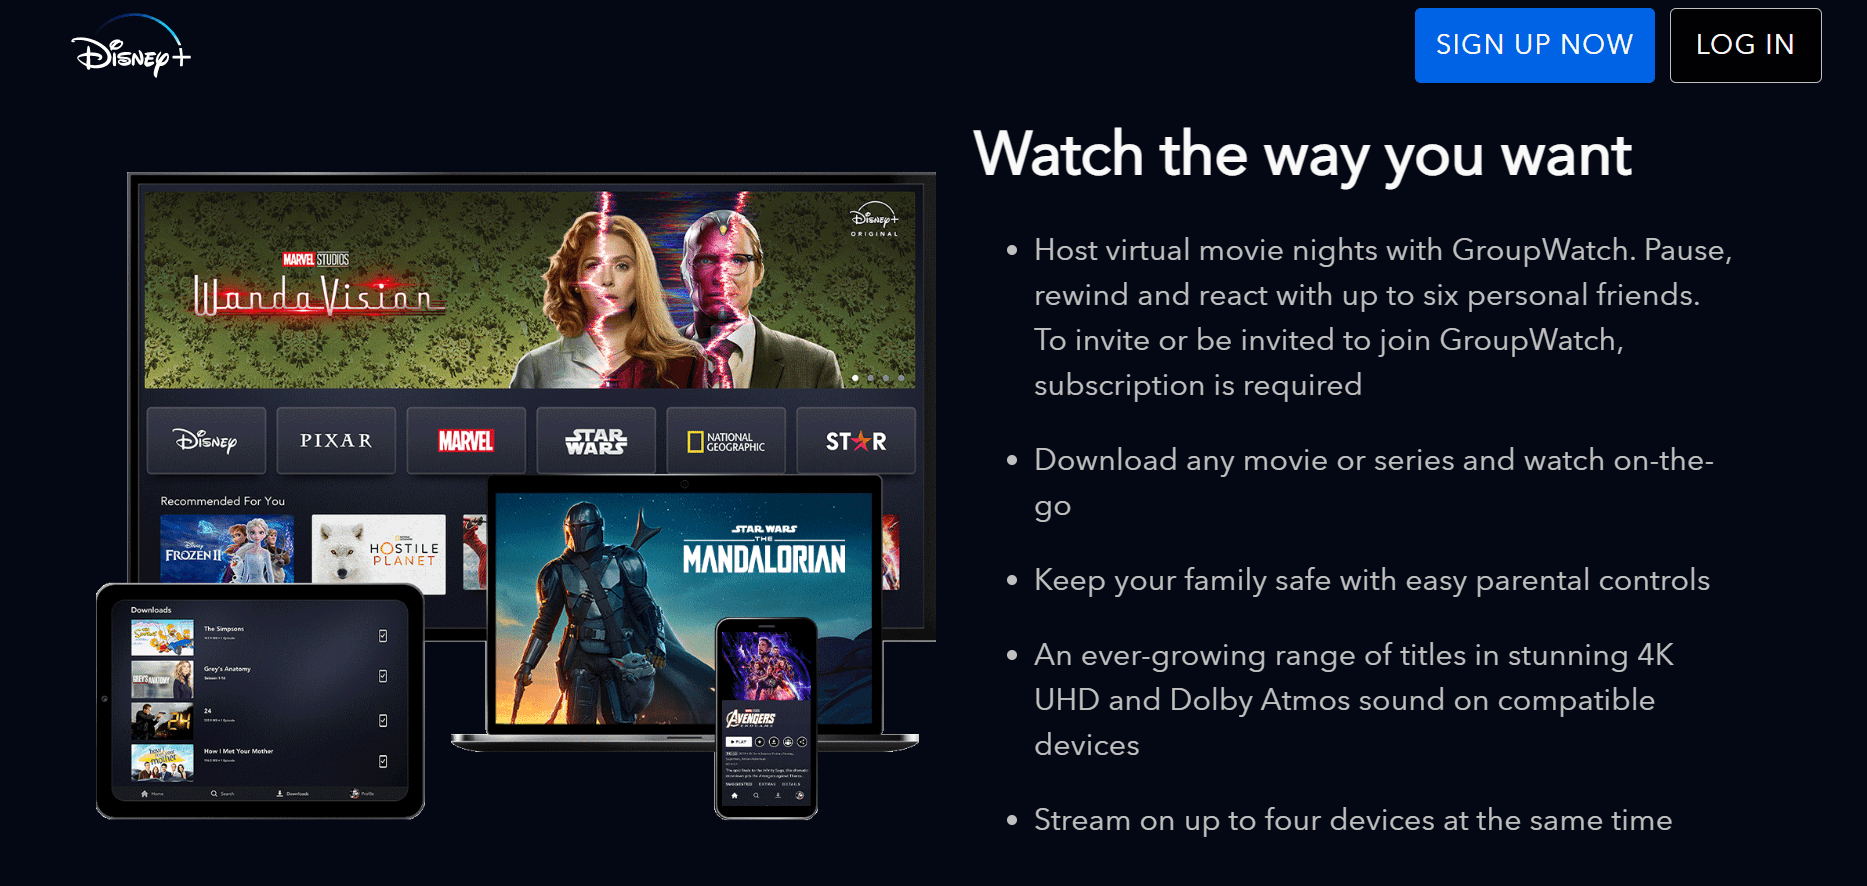 Watch Disney+ on you mobile device or different devices.